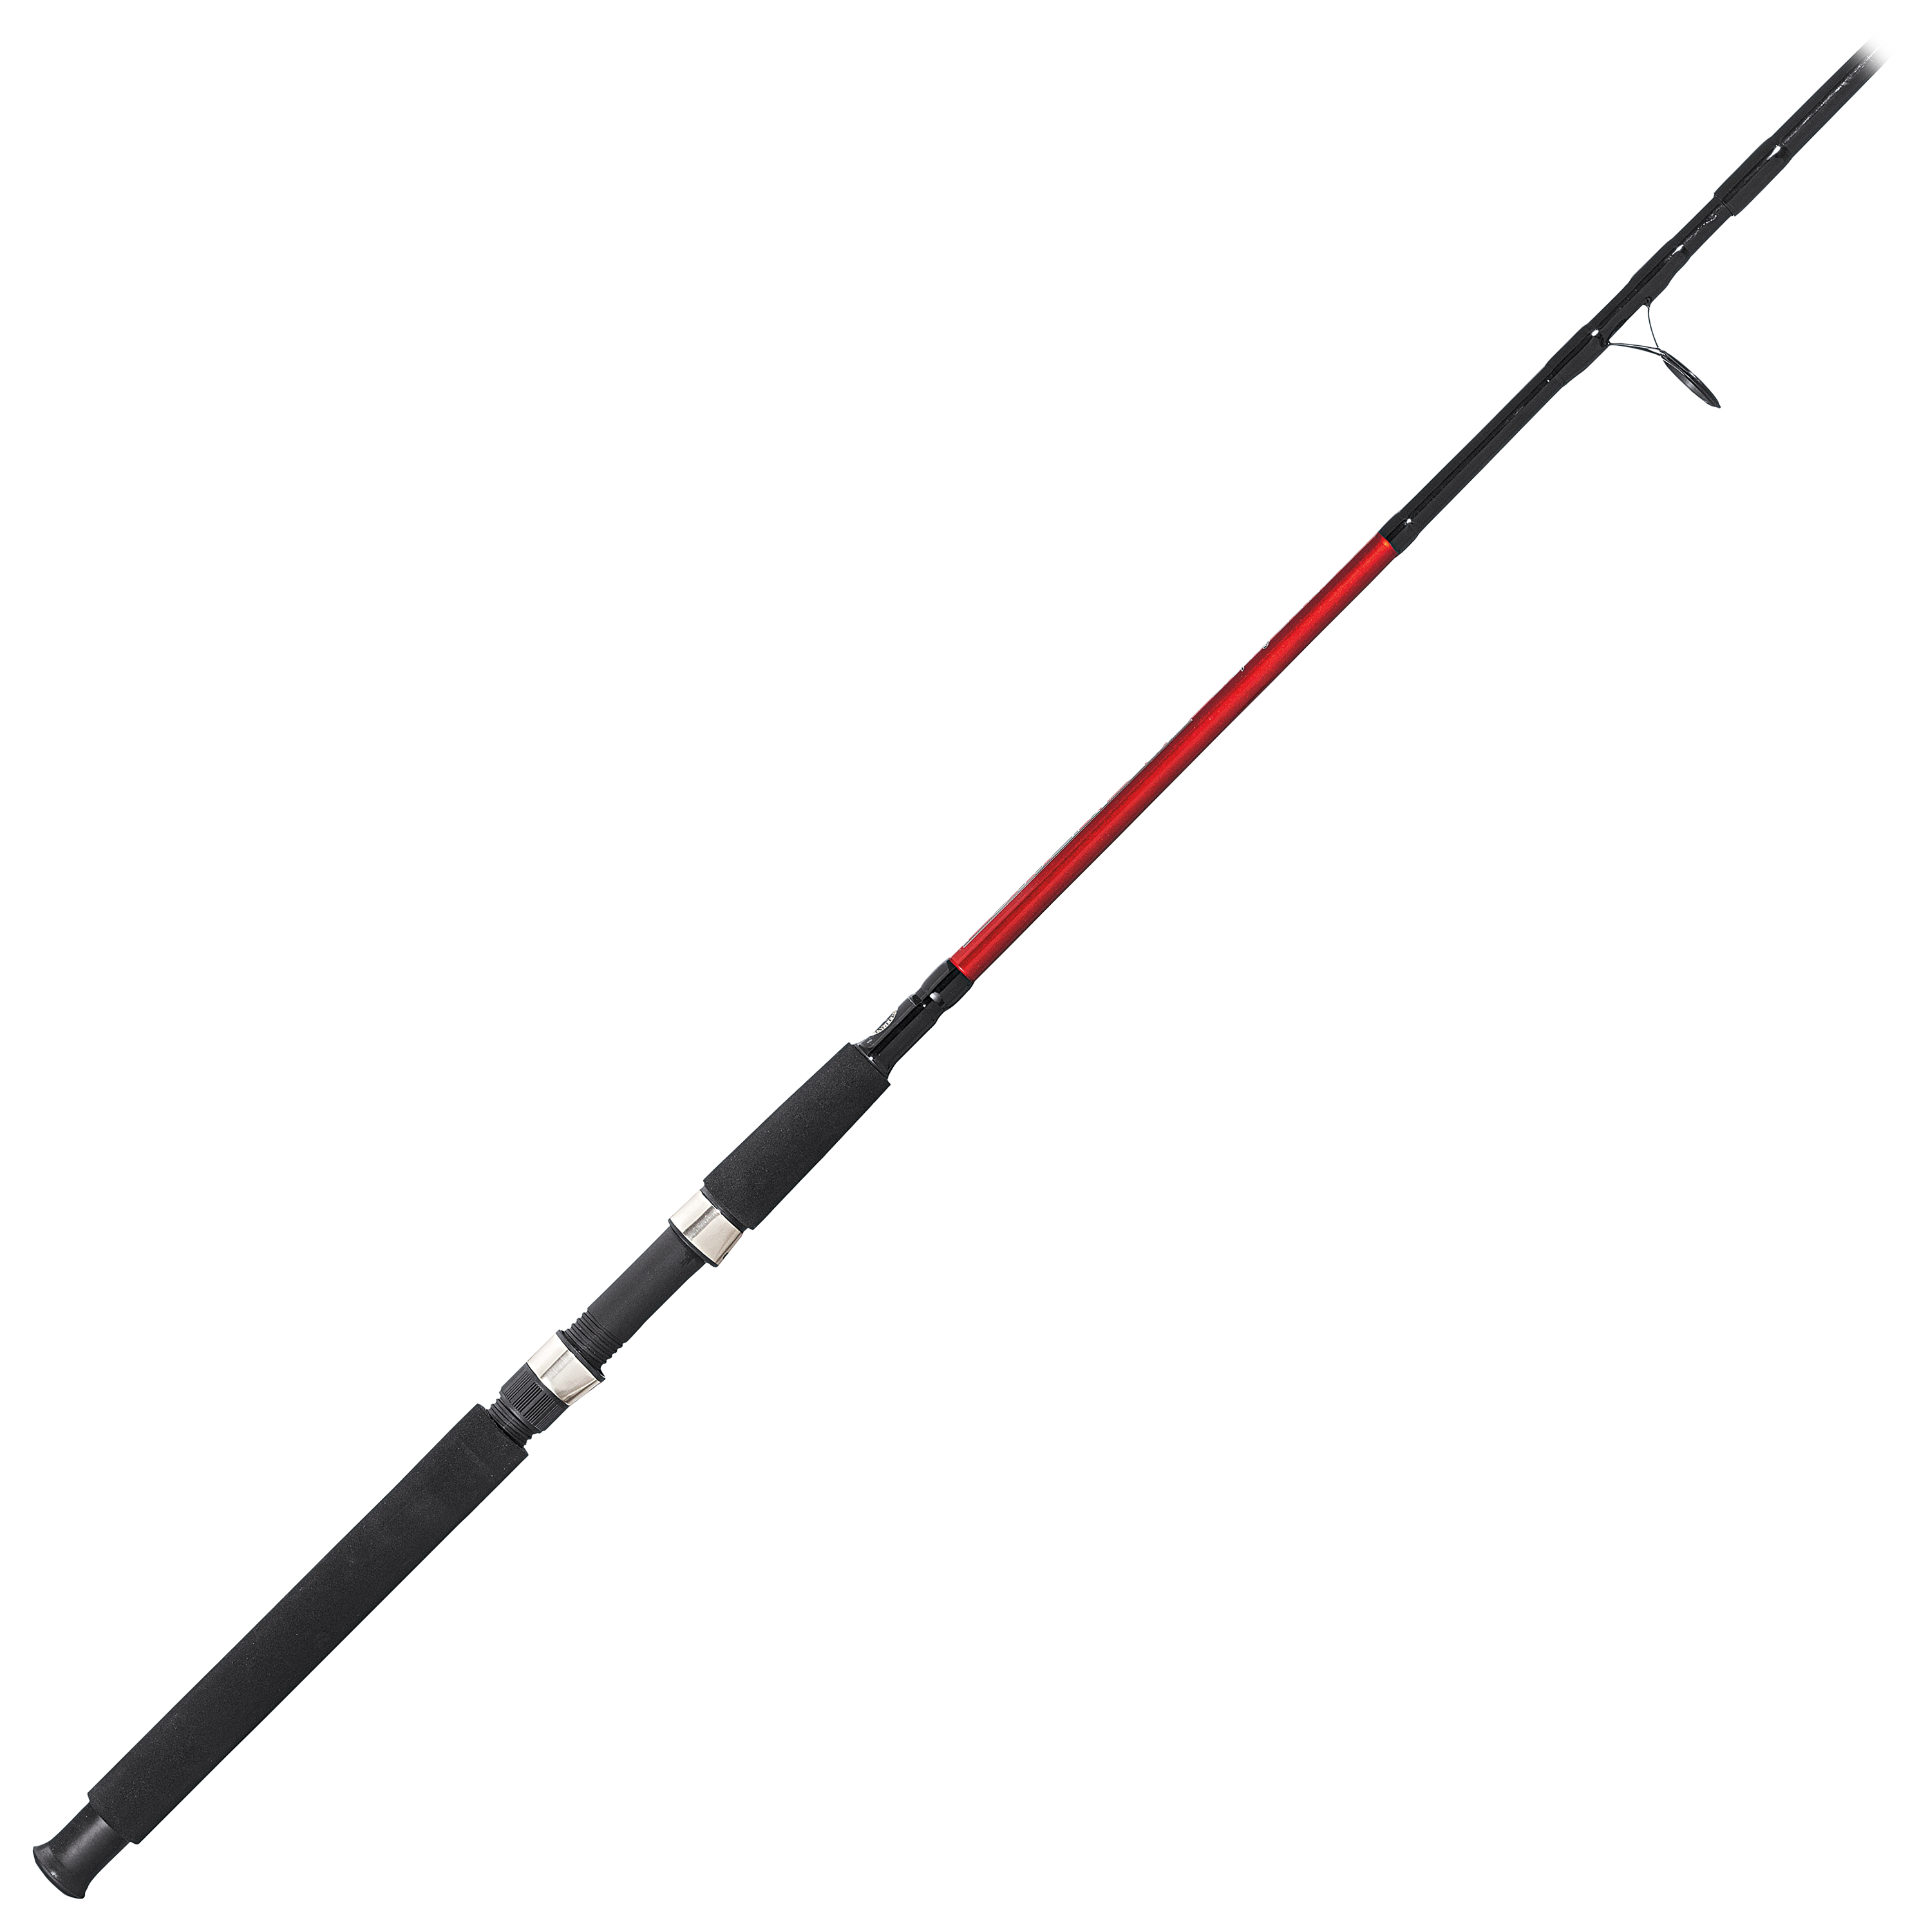 Bass Pro Shops Graphite Series 3' Spinning Rod